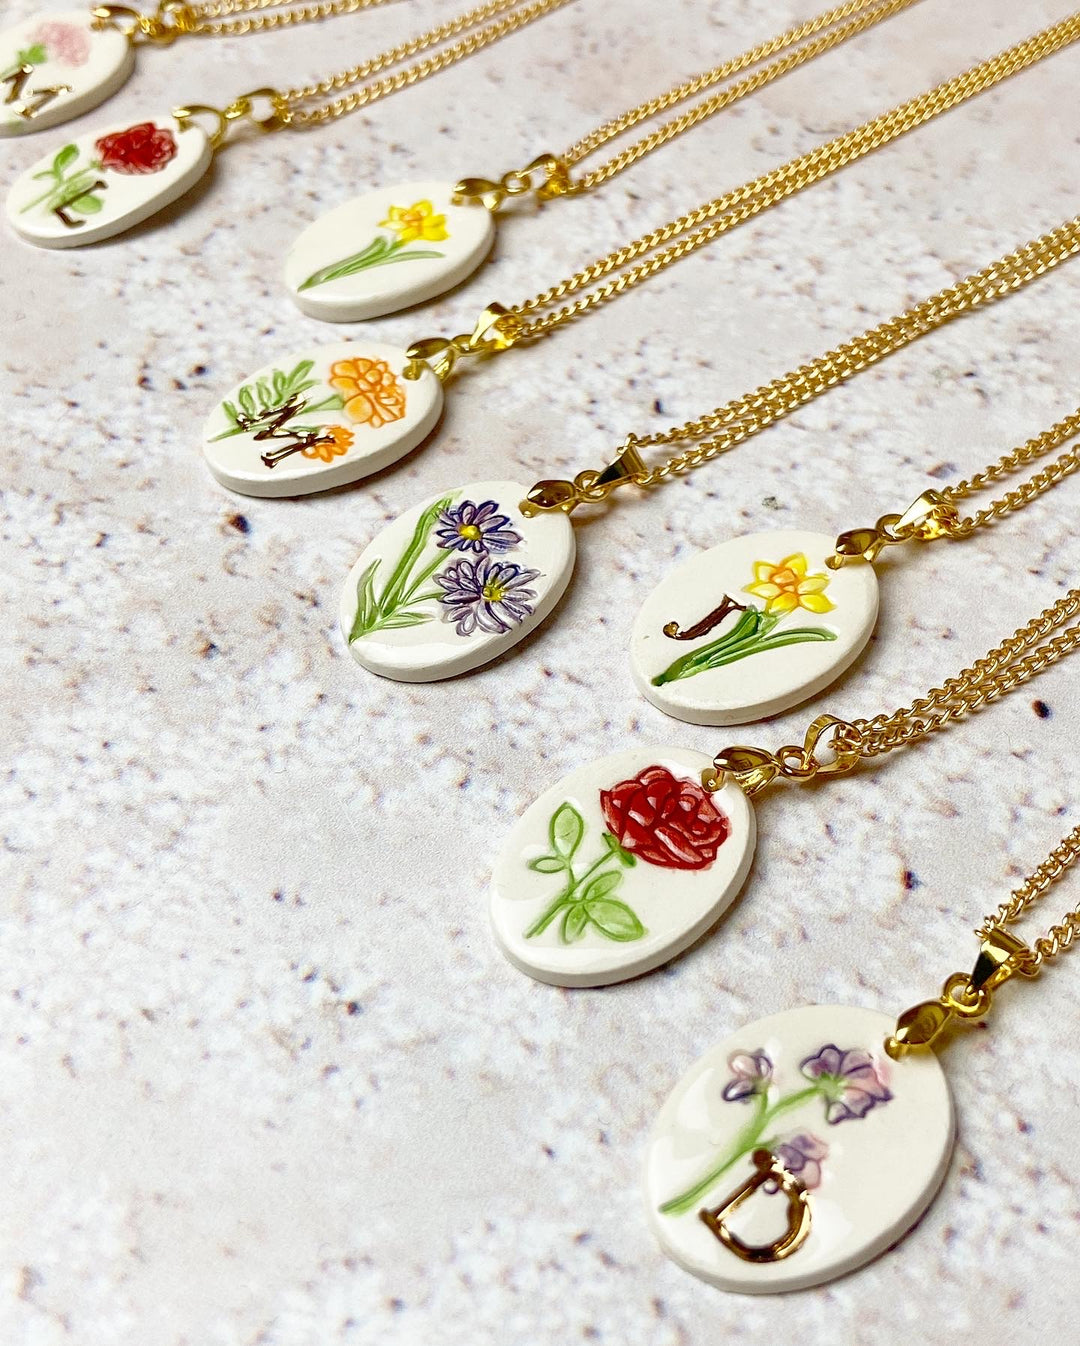 Hand Painted birth flower necklace and ceramic earrings gift set